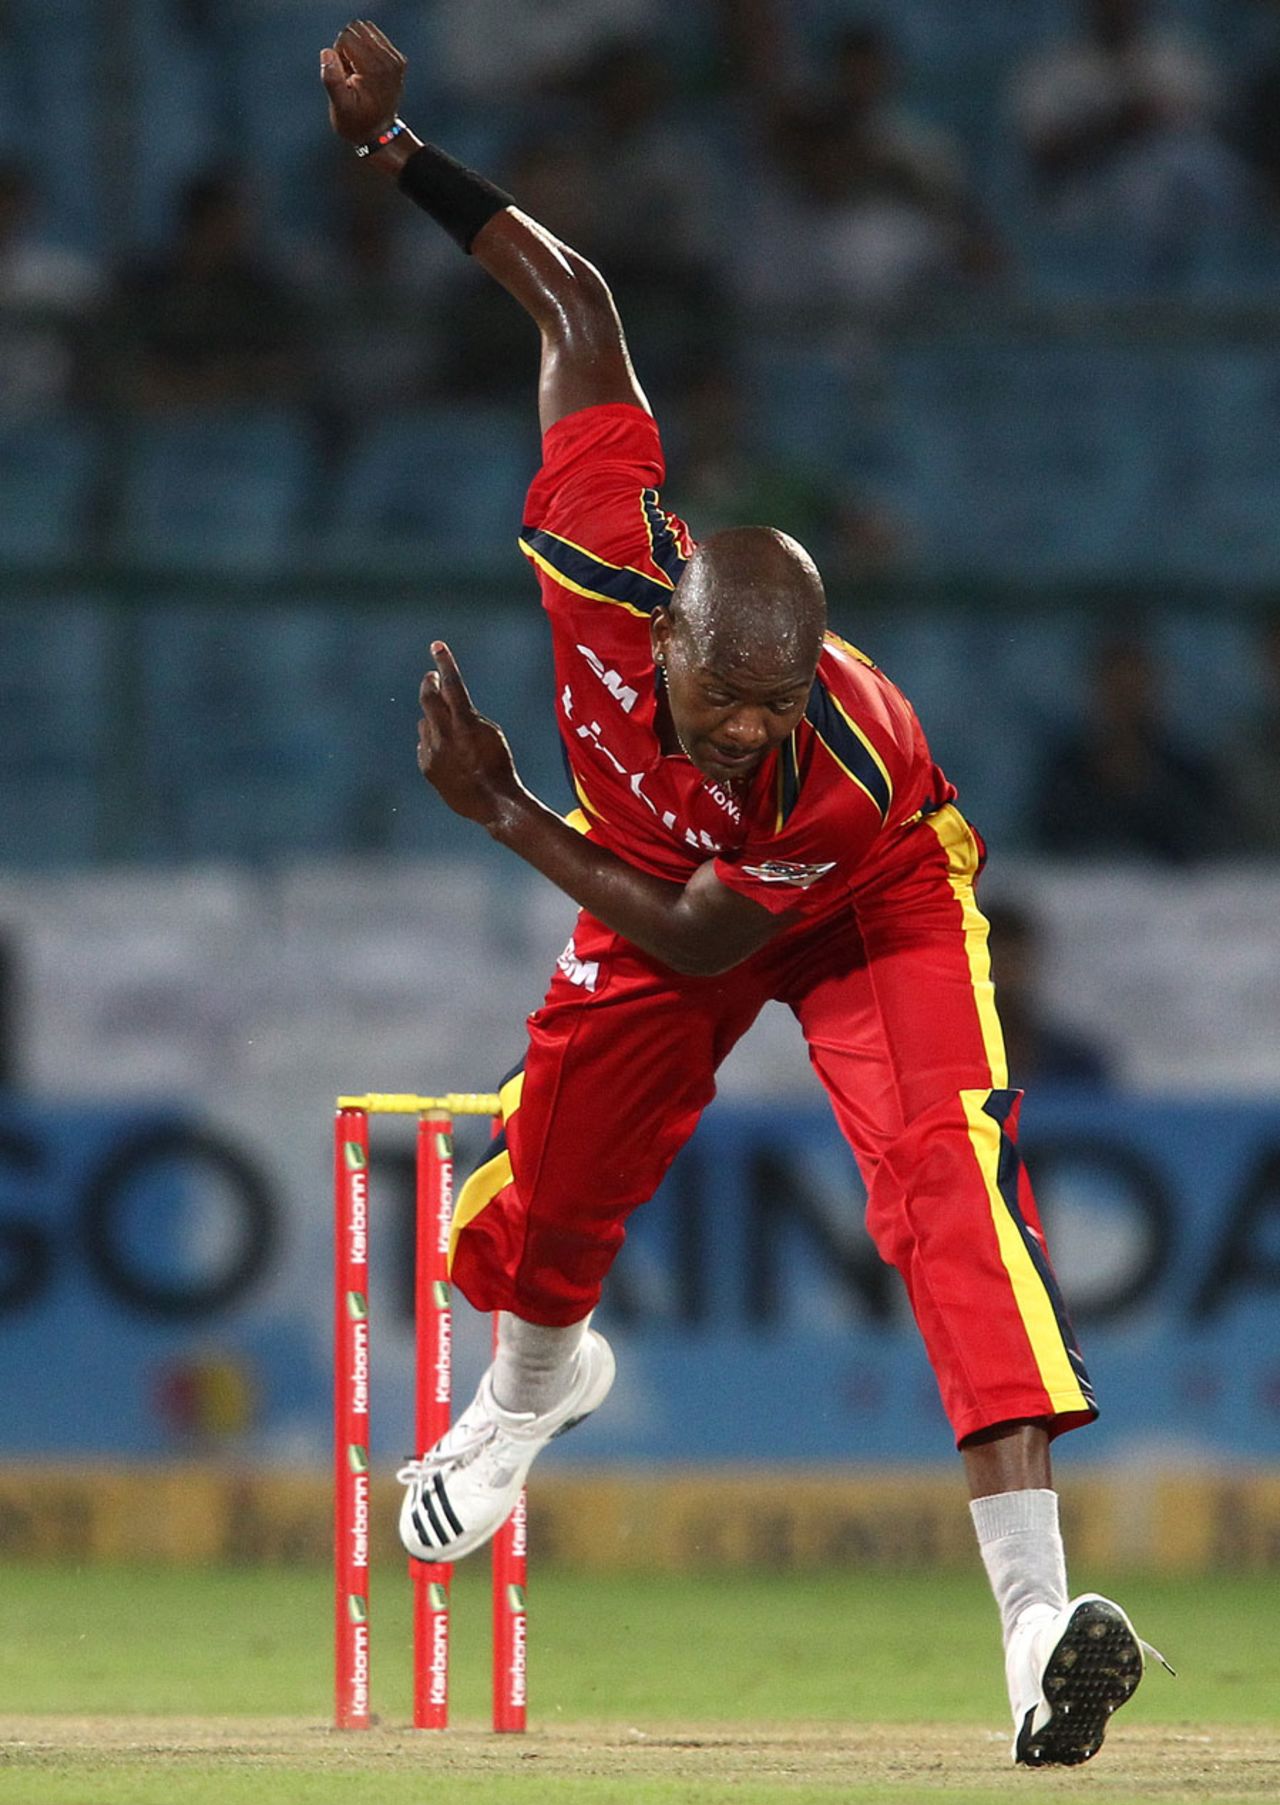 Lonwabo Tsotsobe in his delivery stride, Lions v Rajasthan Royals, Group A, Champions League 2013, Jaipur, Sep 25, 2013